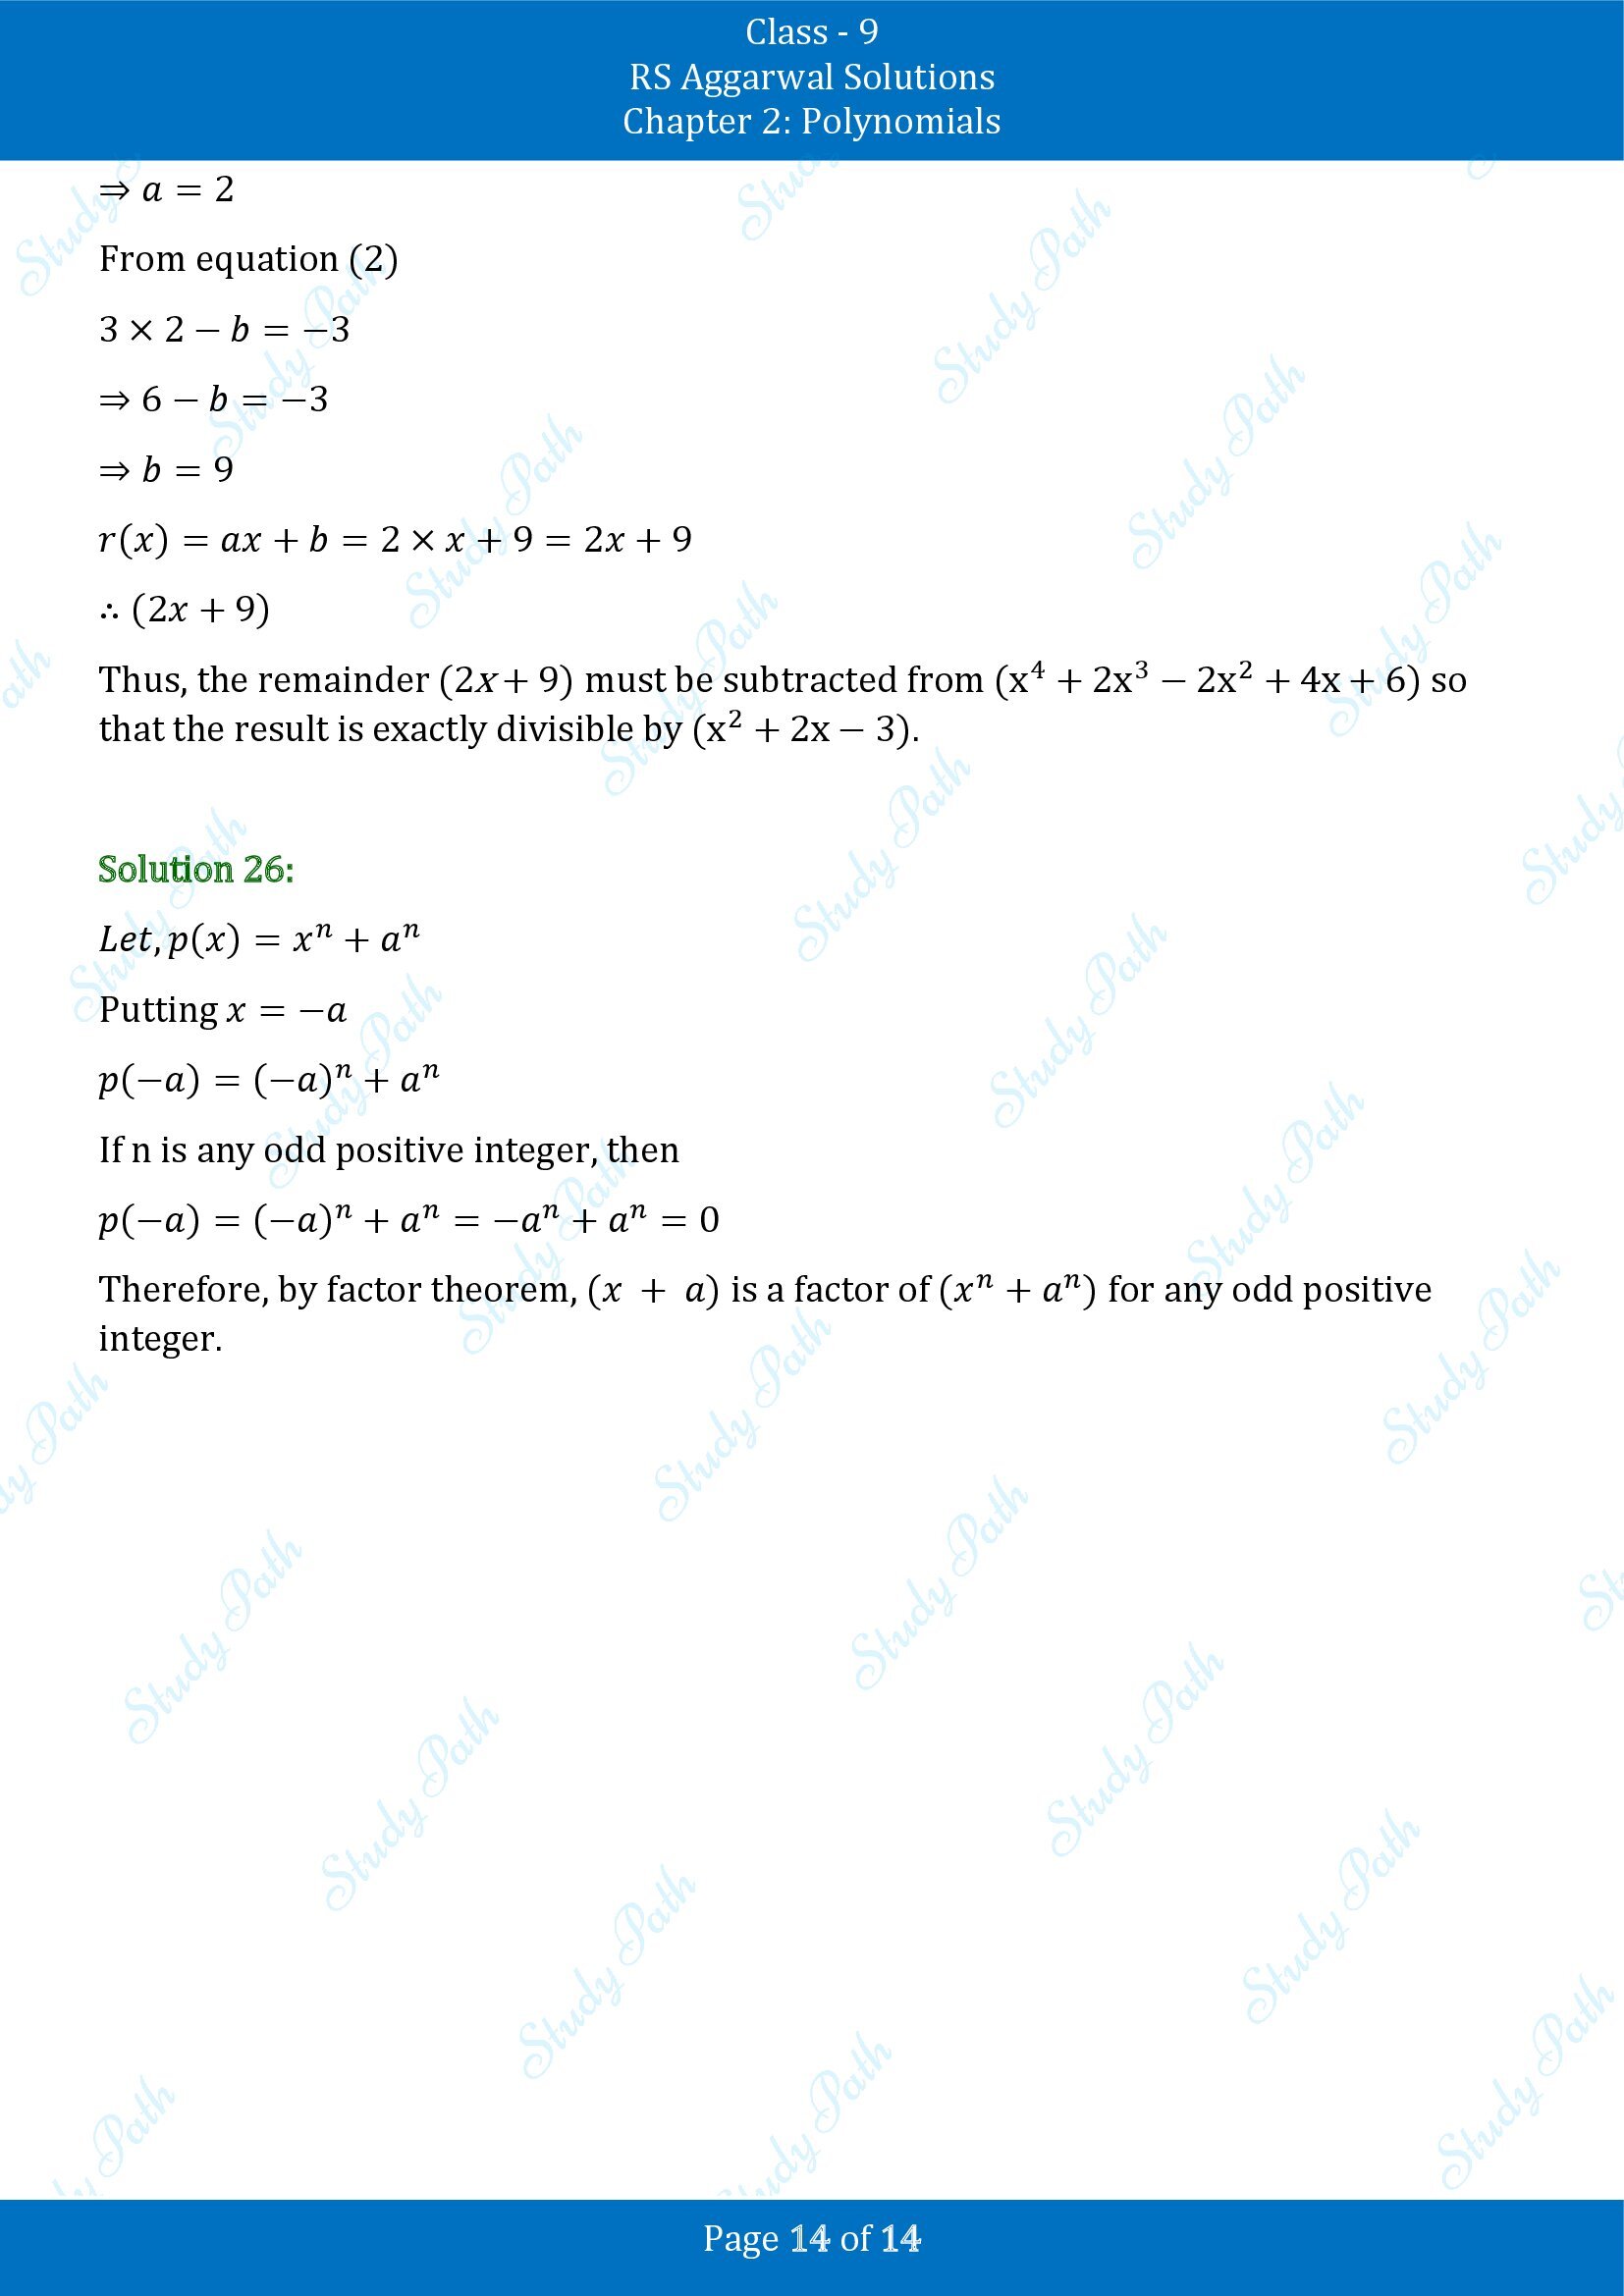 RS Aggarwal Solutions Class 9 Chapter 2 Polynomials Exercise 2D 00014